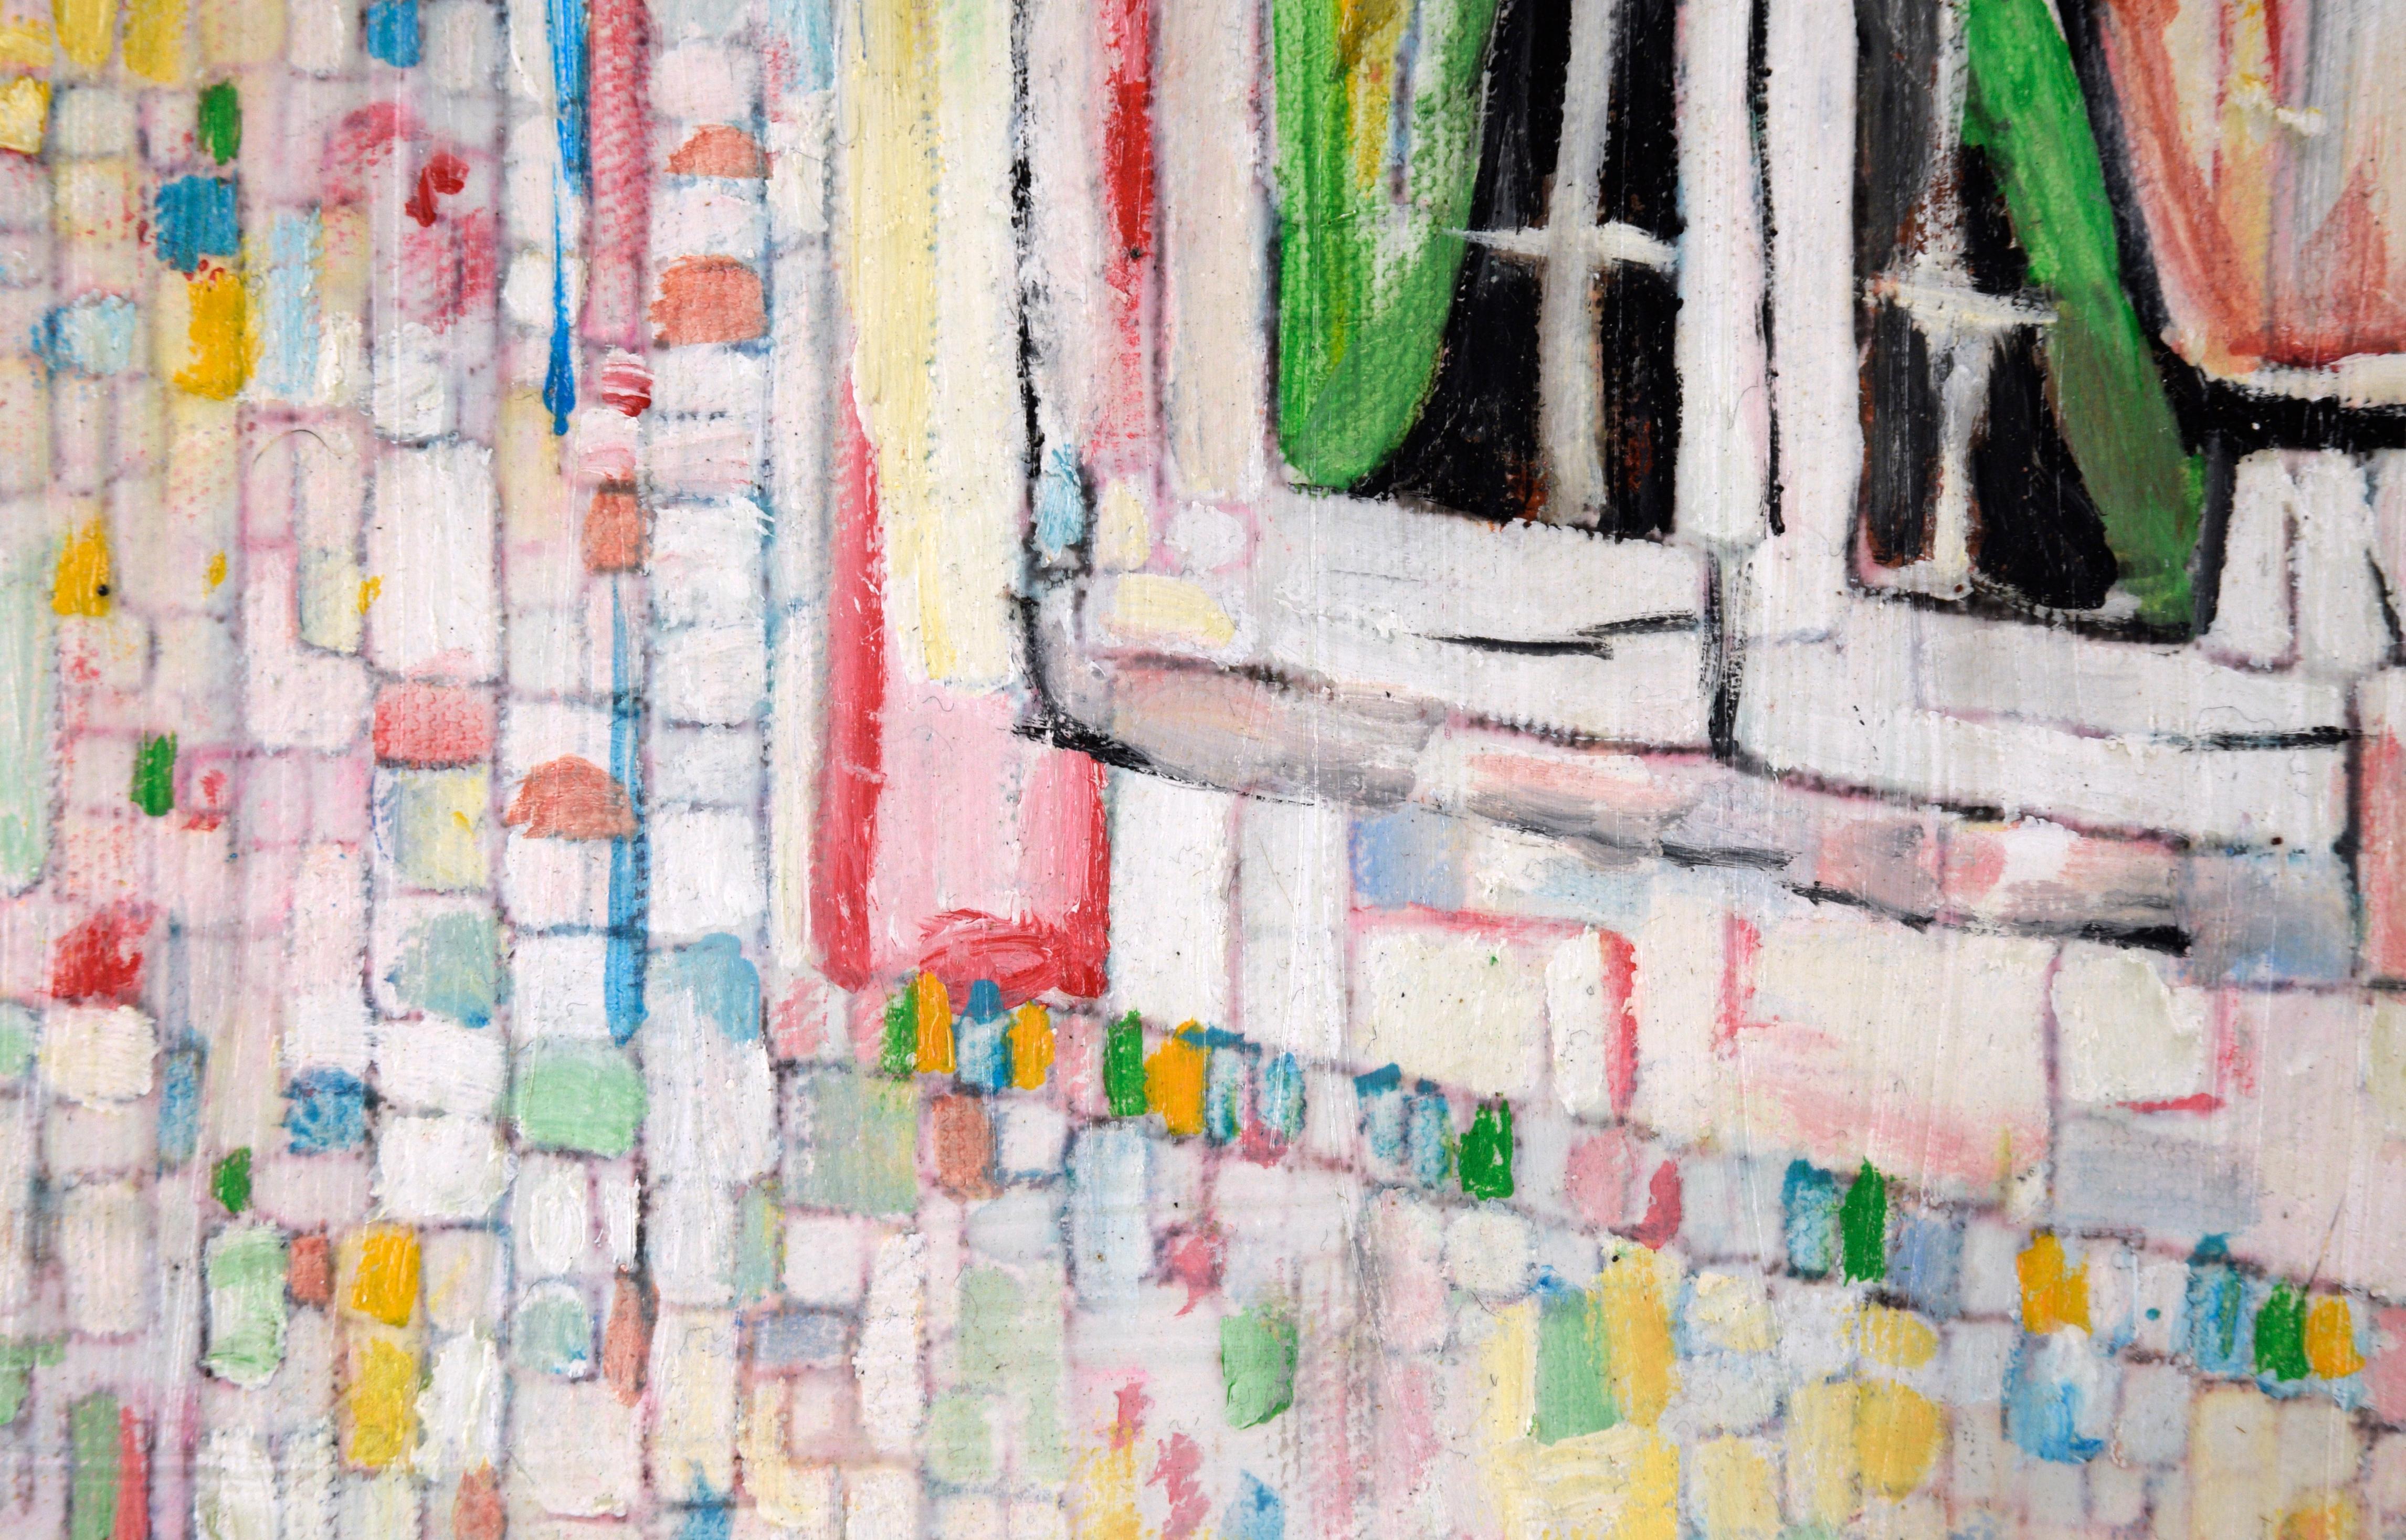 Vibrant depiction of a streetlamp and window by Ana Doolin (Portuguese, b. 1961). Signed 